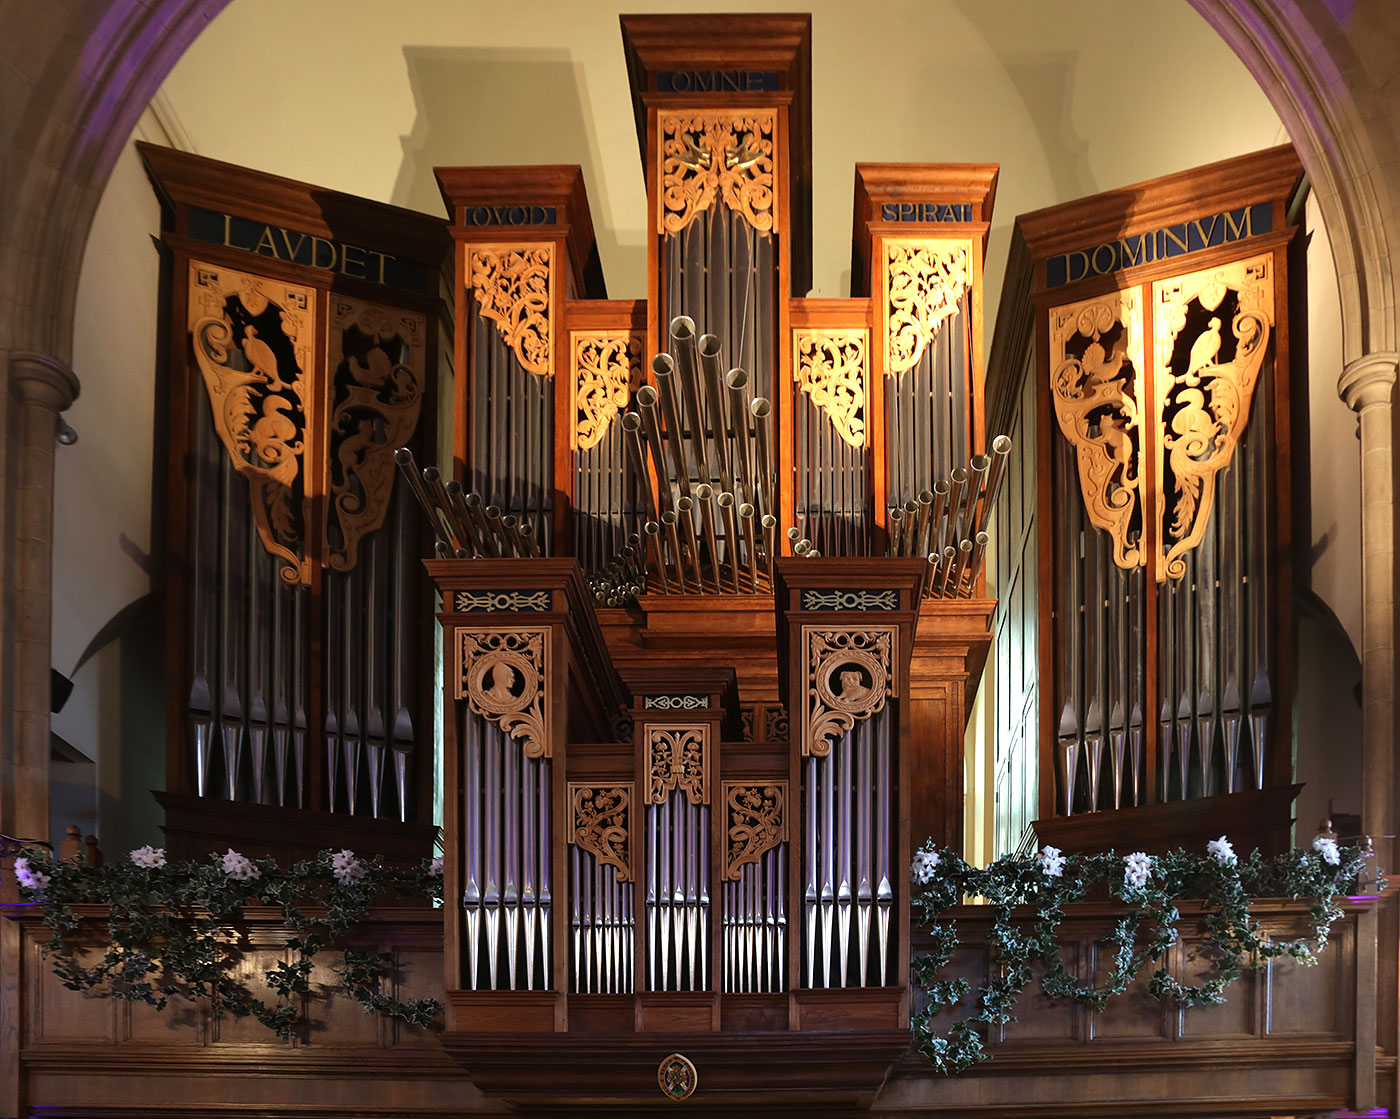 Greyfriar's Kirk  -  Organ Pipes at the west end of the church